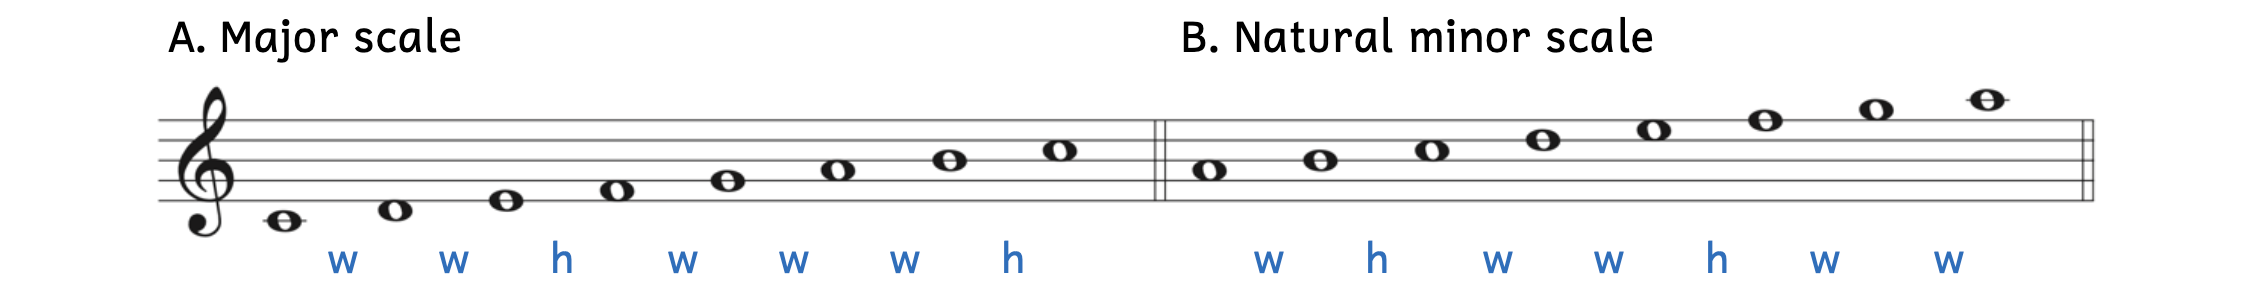 Example A is an ascending major scale beginning on C. The steps between notes are a whole step, whole step, half step, whole step, whole step, whole step, and half step. Example B is an ascending natural minor scale beginning on A. The steps in between the notes are a whole step, half step, whole step, whole step, half step, whole step, and whole step.